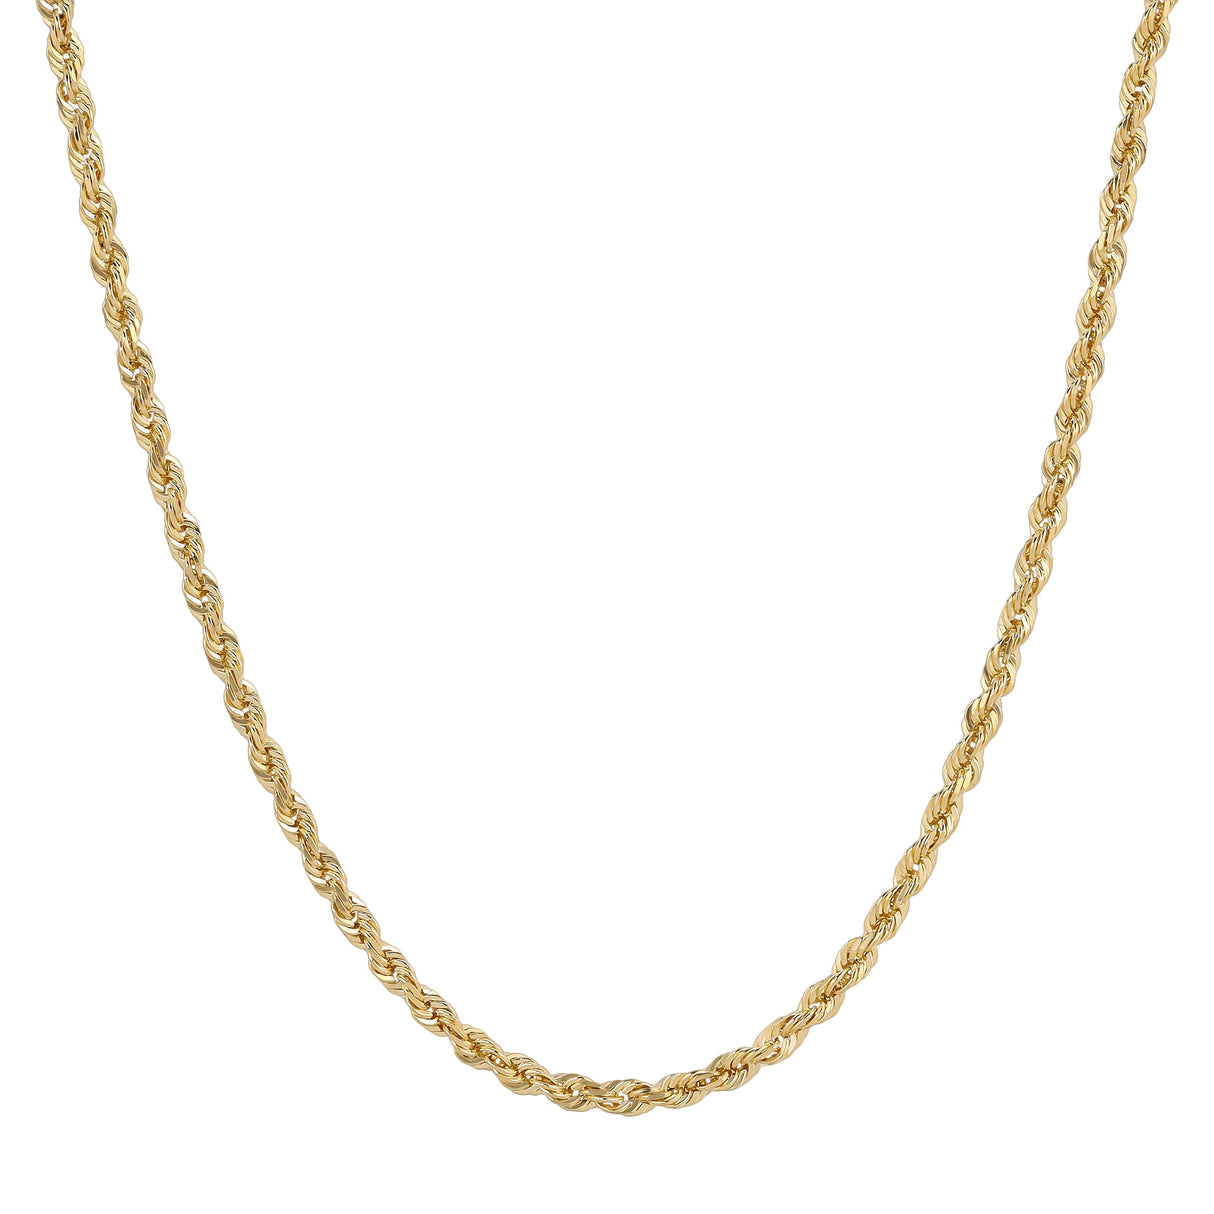 Men's 10K yellow gold chain necklace (1.5mm-6.0mm) - Italian crafted.